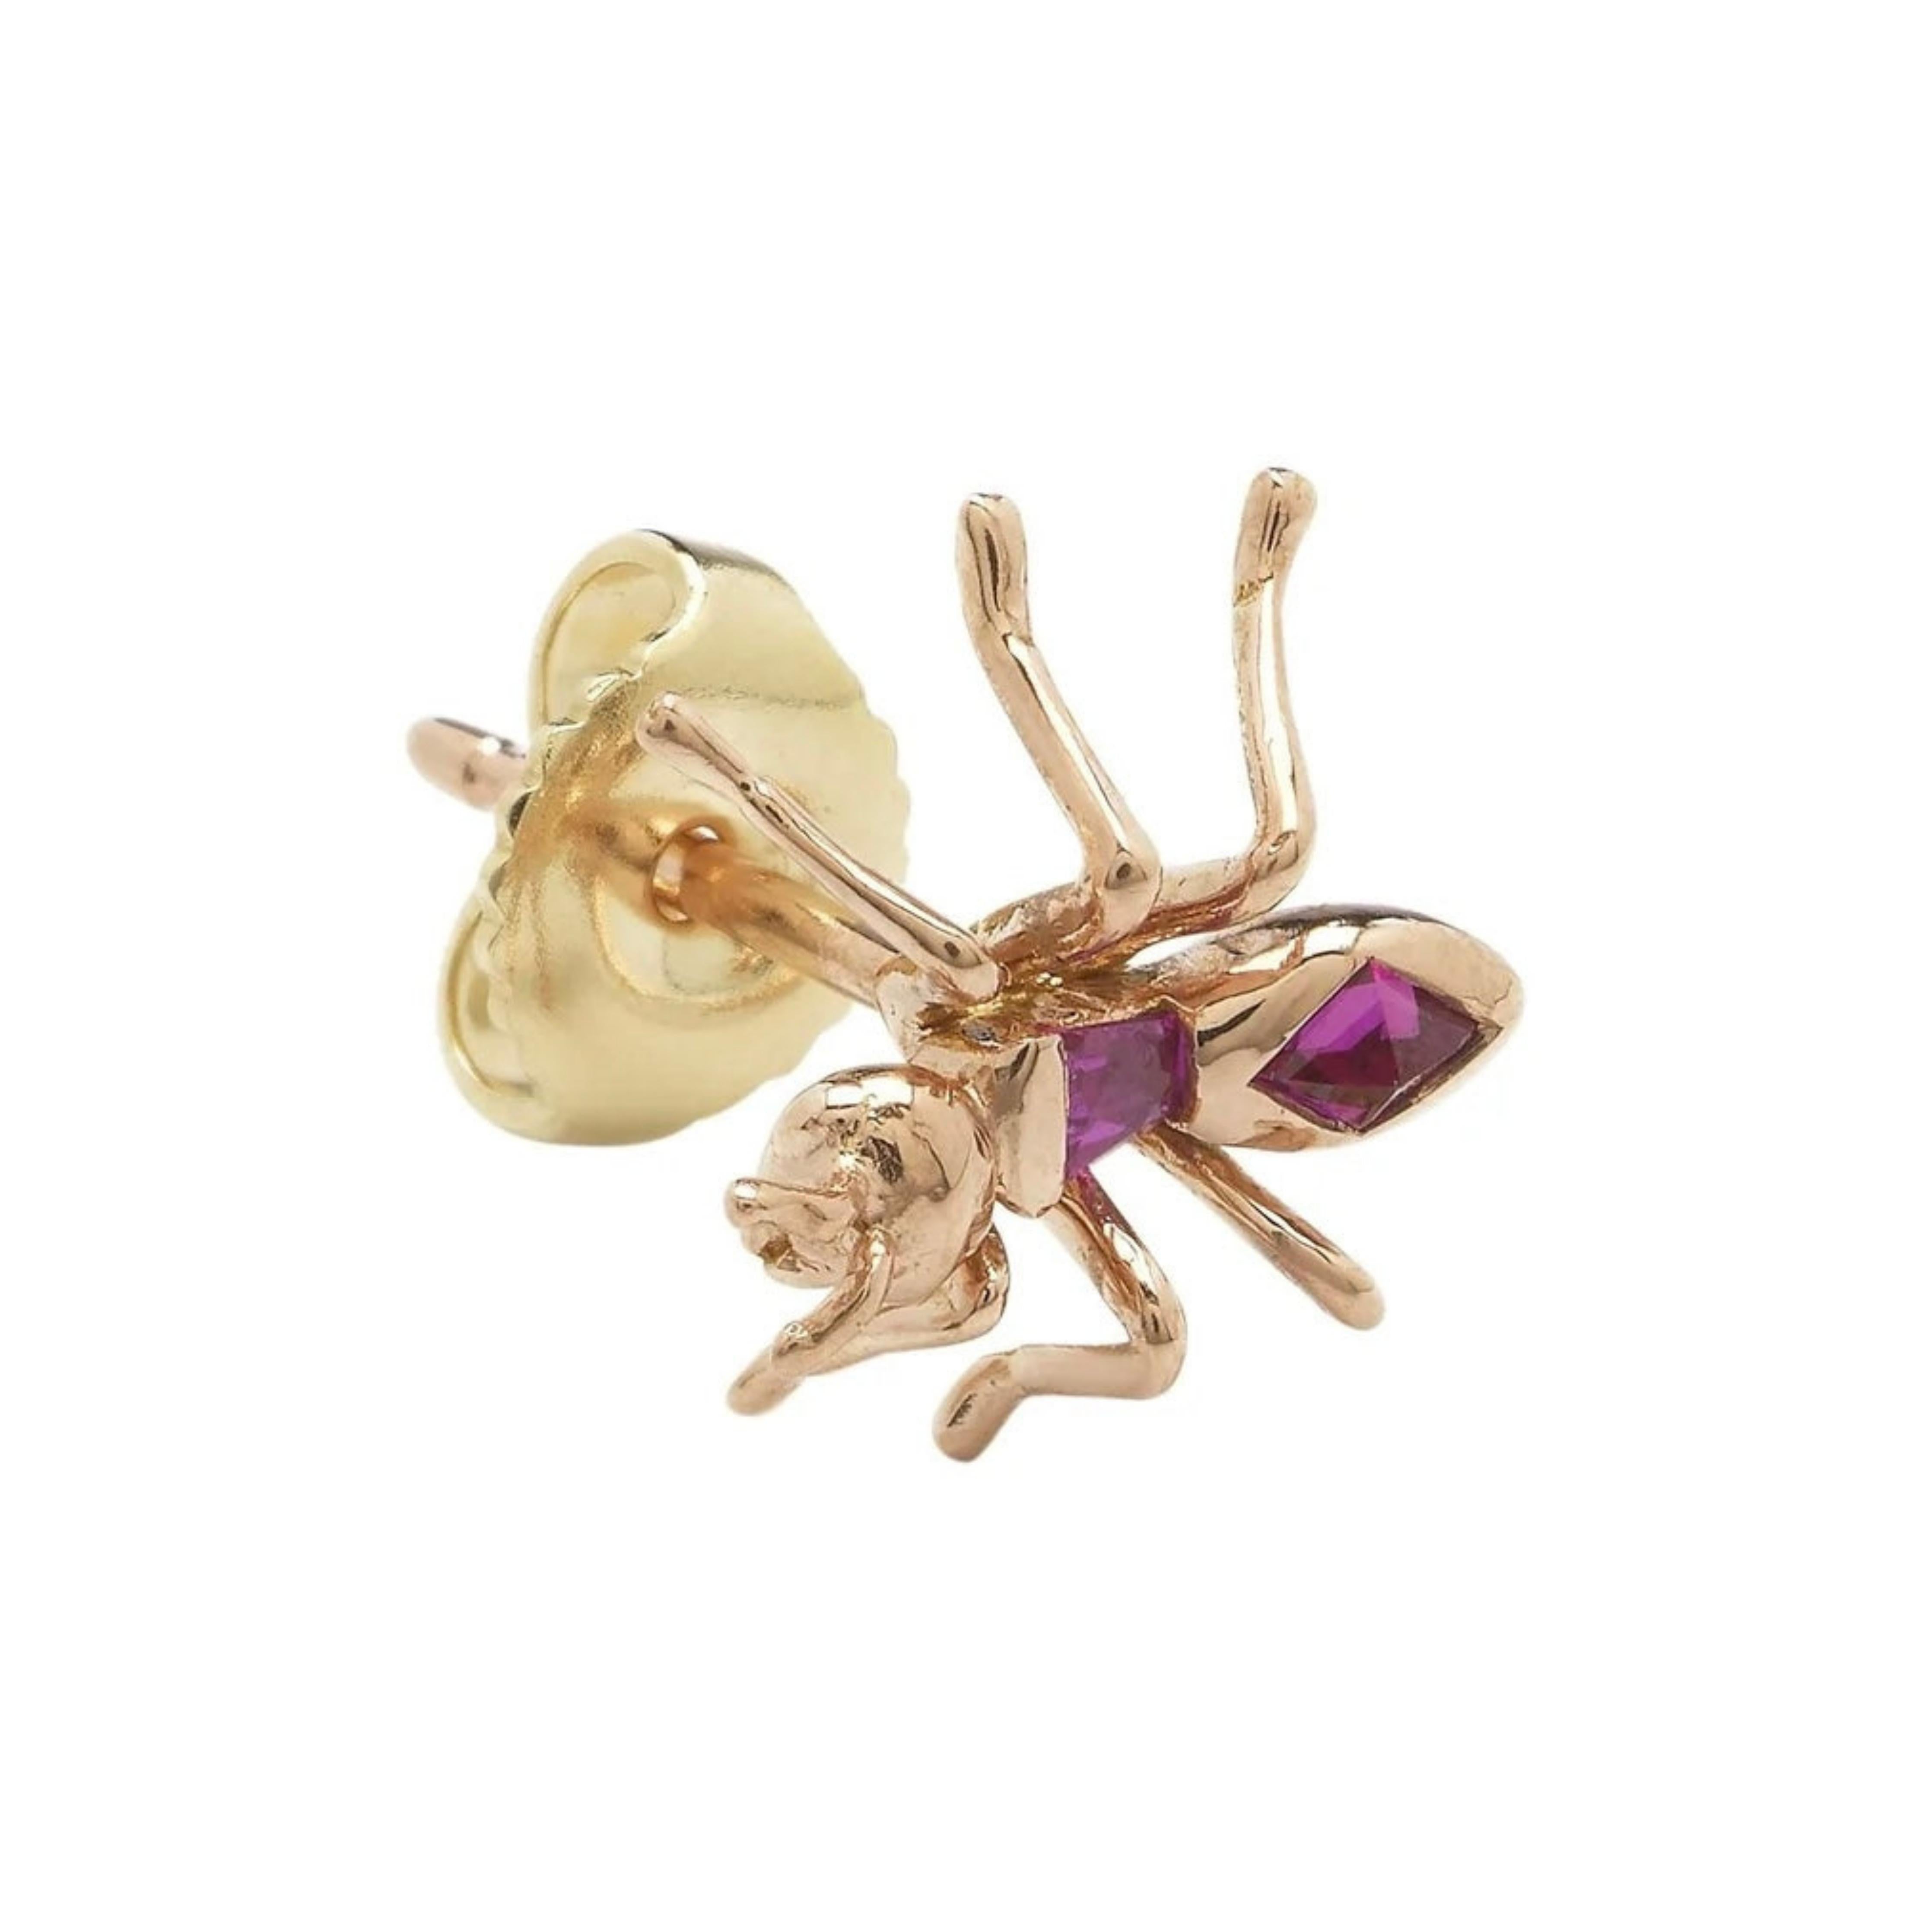 Bibi van der Velden Ant Single Stud Earring - Green Tsavorite. Sculptural single earring in the shape of an ant with two pink sapphire stones forming the body. Earring shown from the side view.